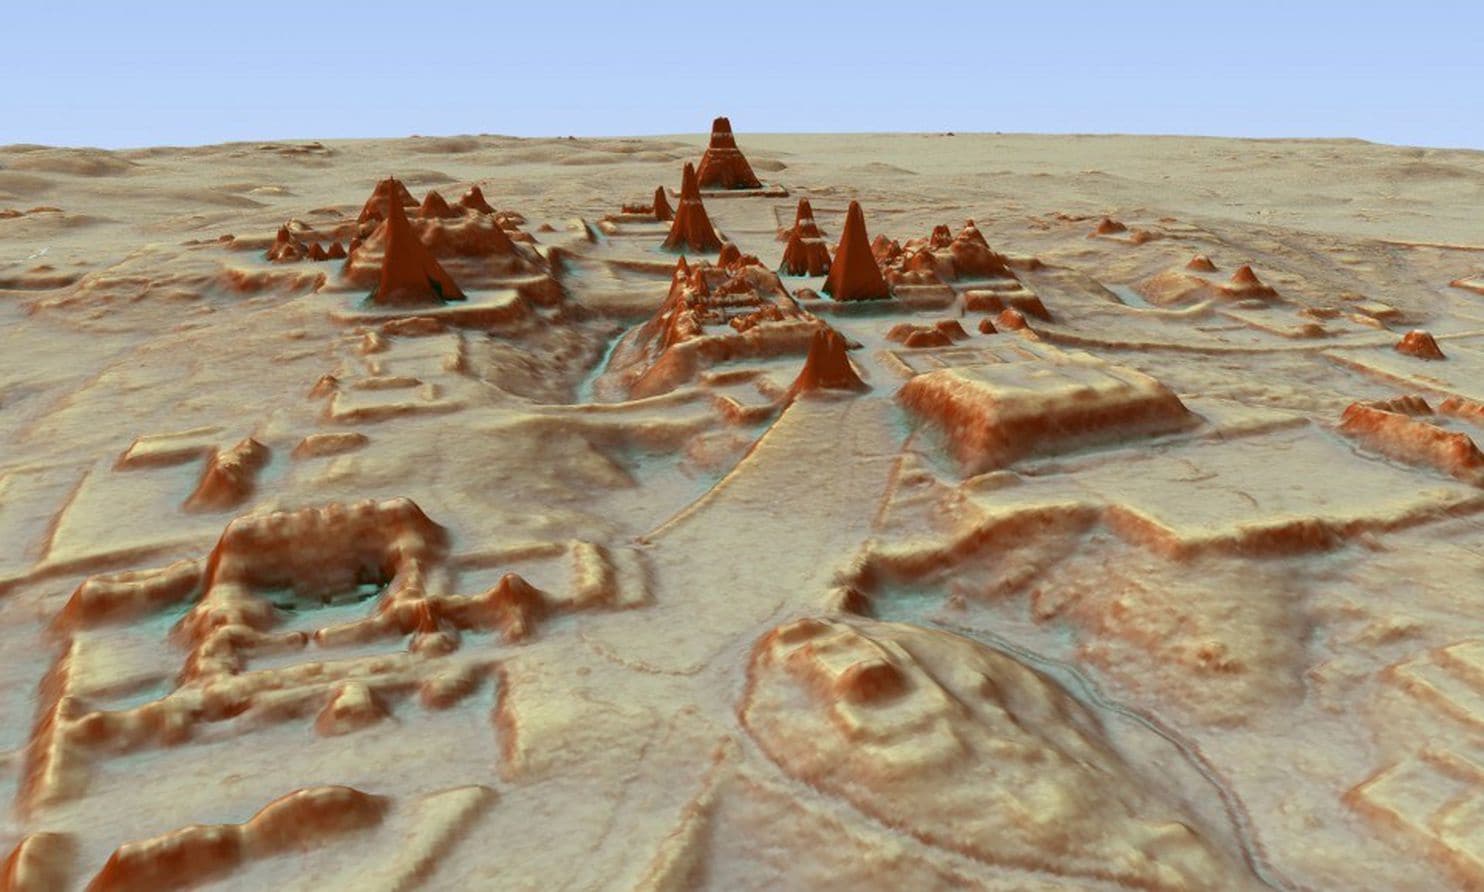 Digital 3-D image provided by Guatemala's Mayan Heritage and Nature Foundation, PACUNAM, shows a depiction of the Maya archaeological site at Tikal in Guatemala created using lidar aerial mapping technology.  (Canuto & Auld-Thomas/PACUNAM via AP)